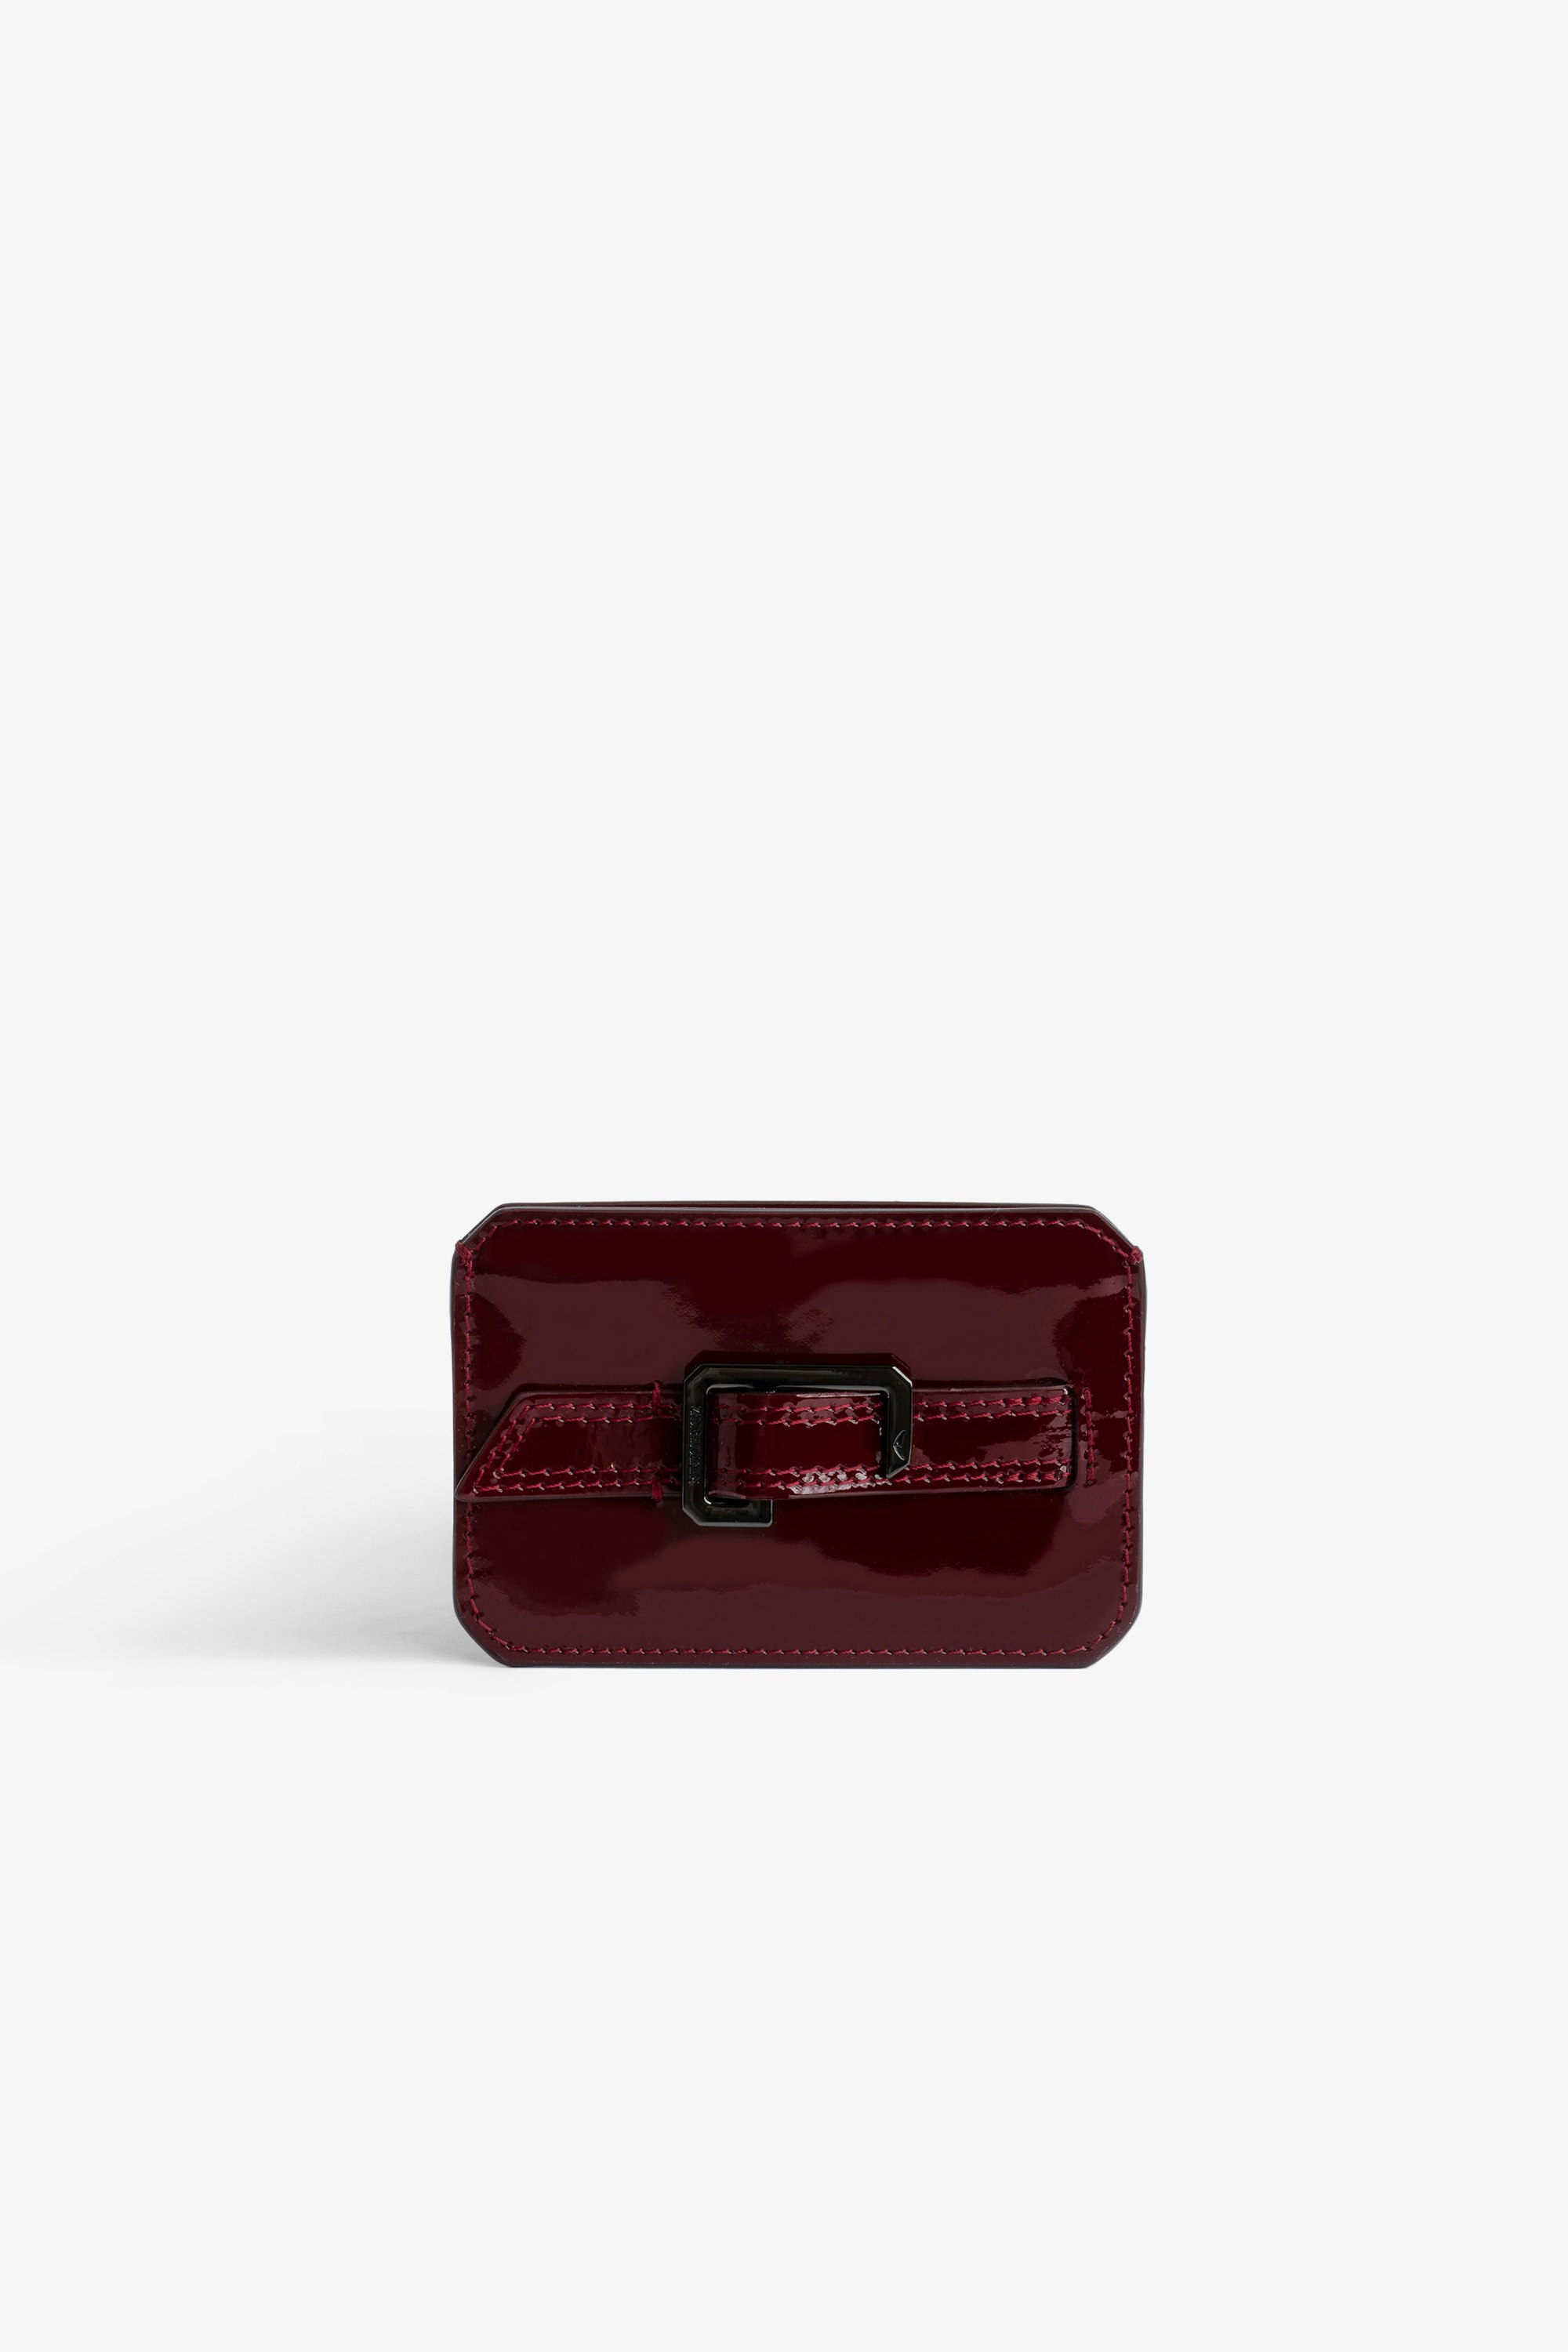 Le Cecilia Pass Card Holder Women’s burgundy patent leather card holder 